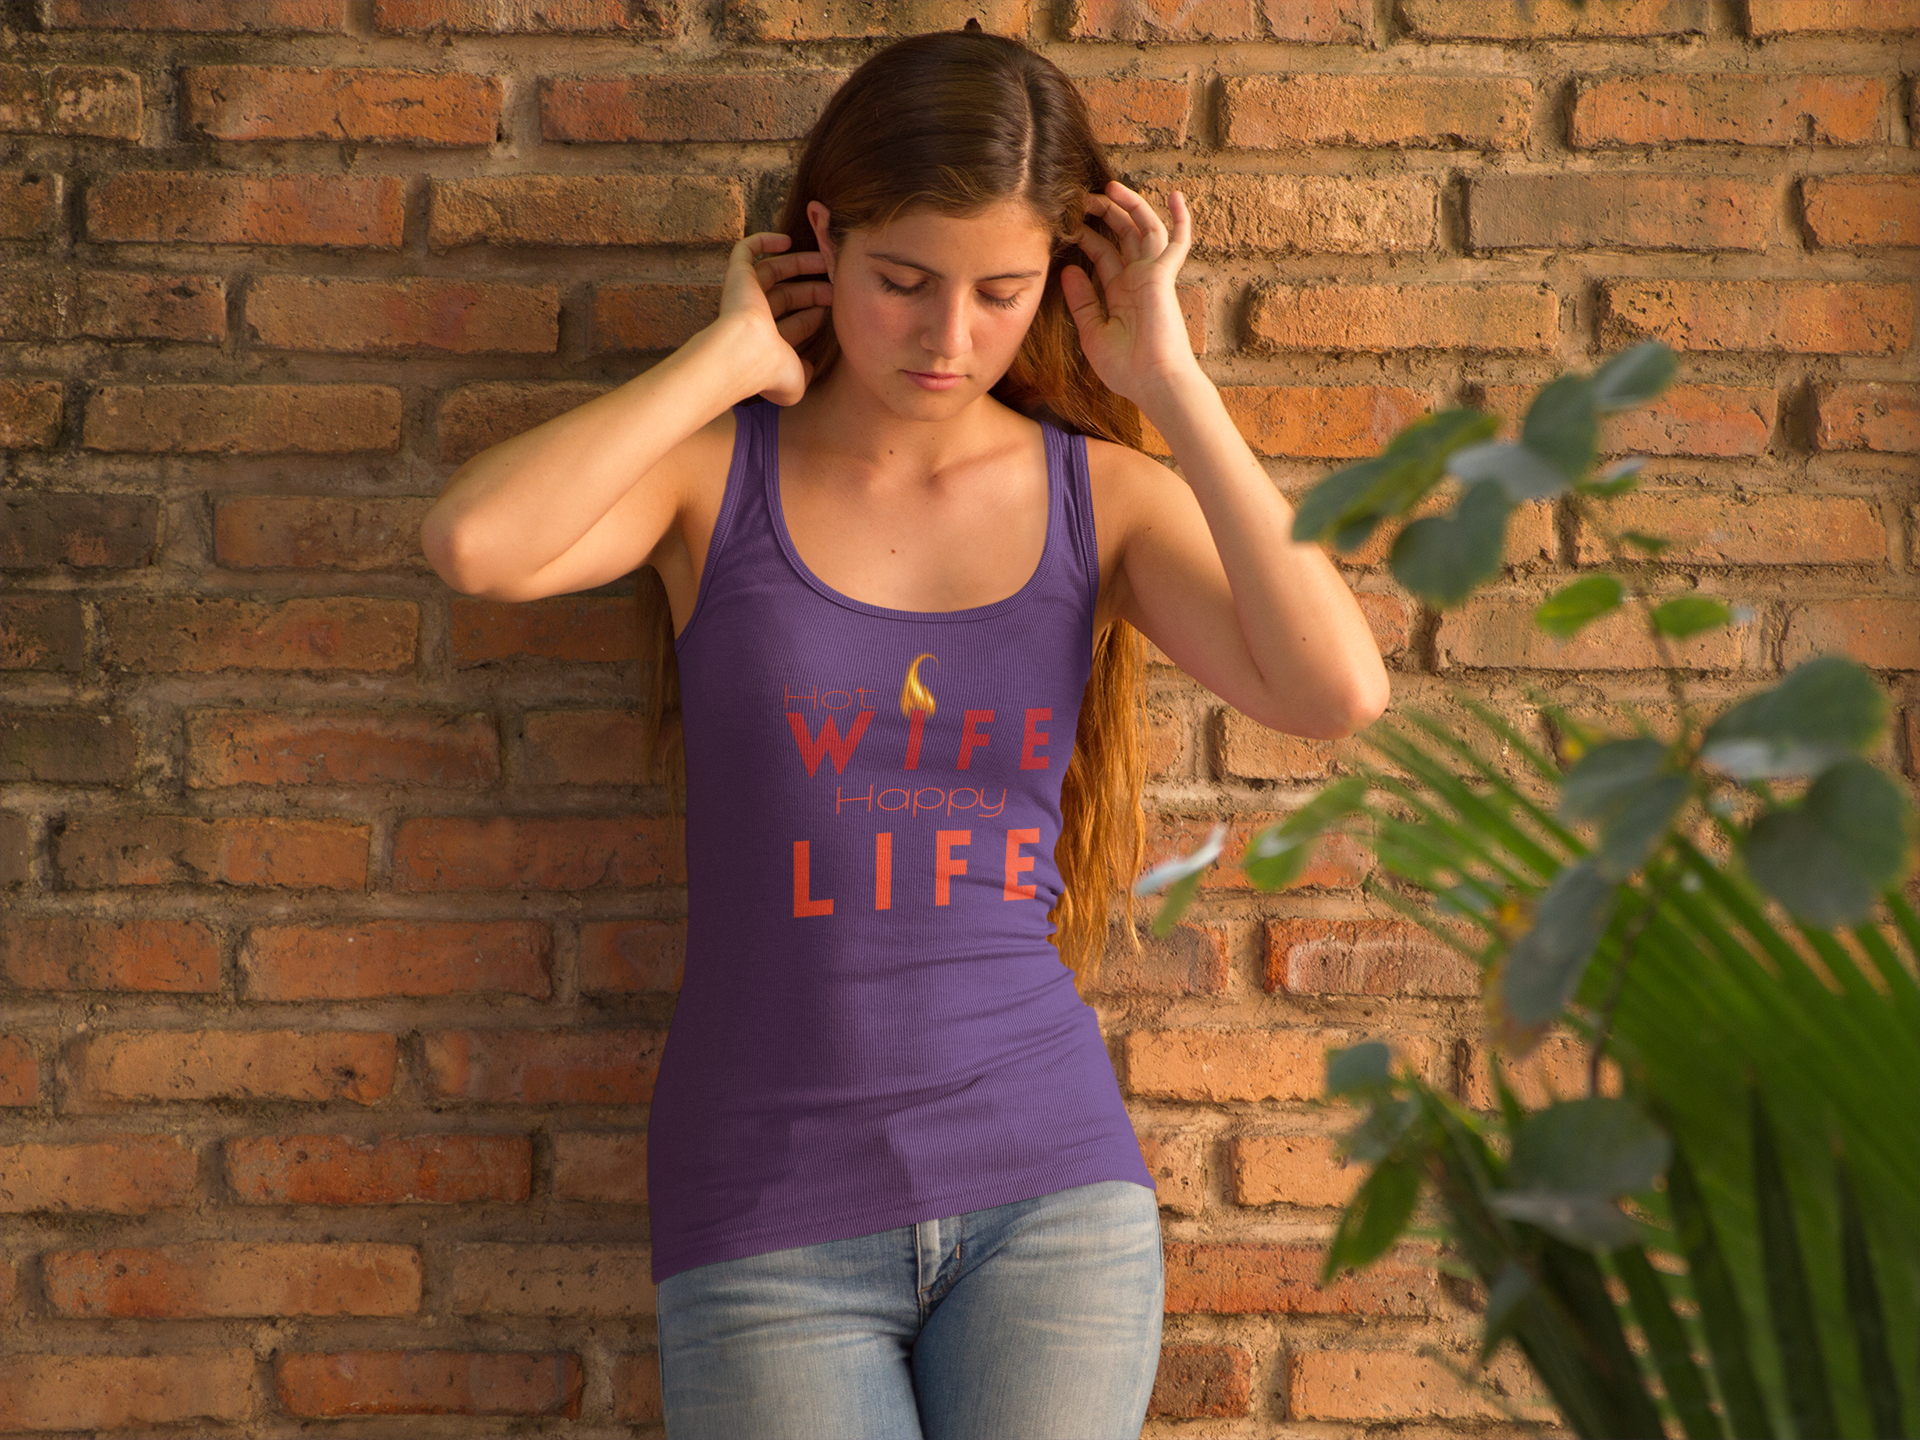 Young Female with Layne Studios "Hot Wife Happy Life" Graphic Solid Purple Rush Racerback Tank-Top